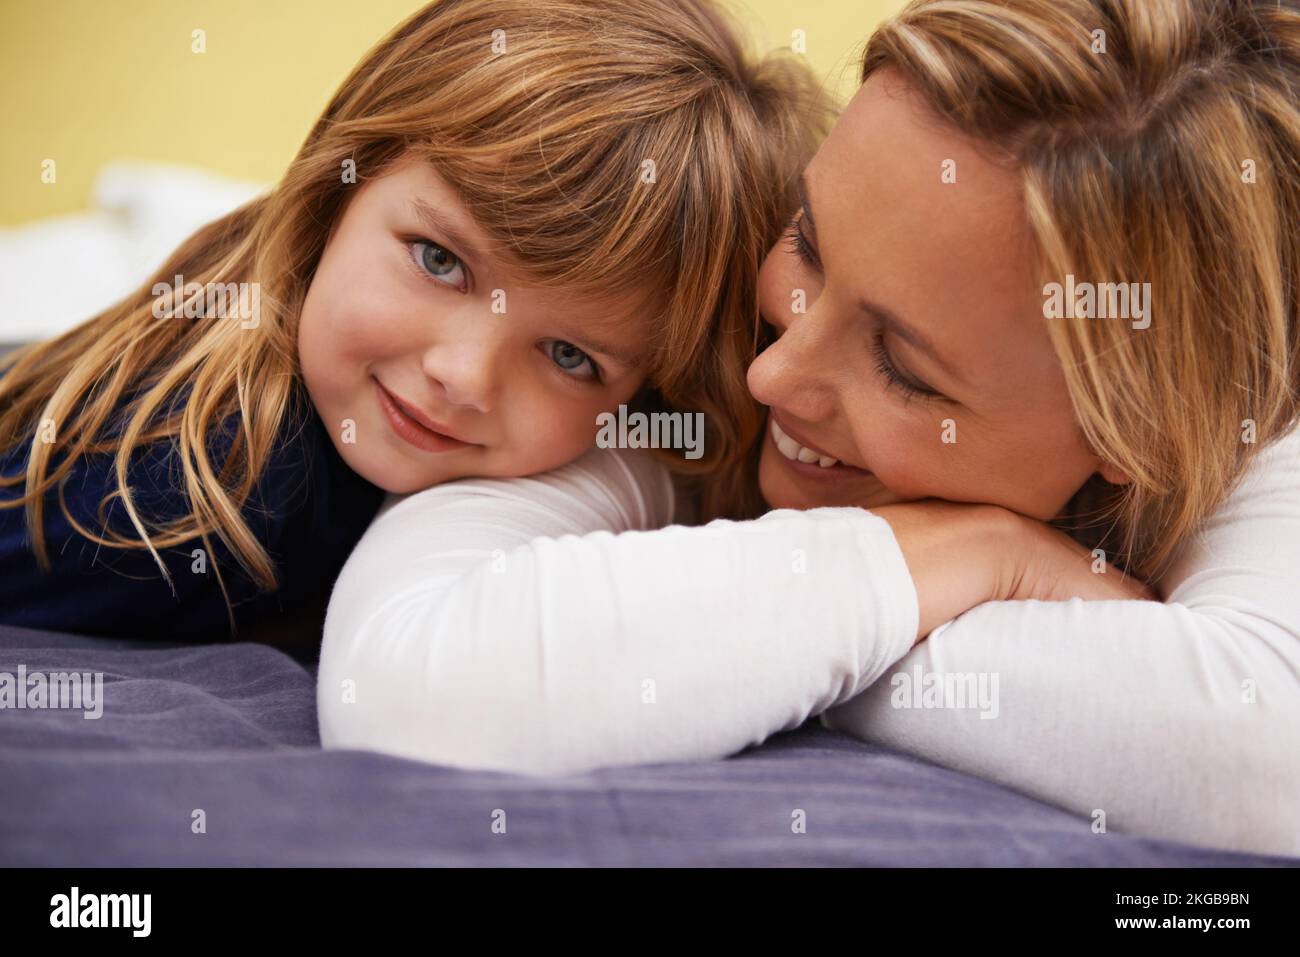 Tender moments with Mom. Portrait of a little girl and her mother lying together on a bed. Stock Photo